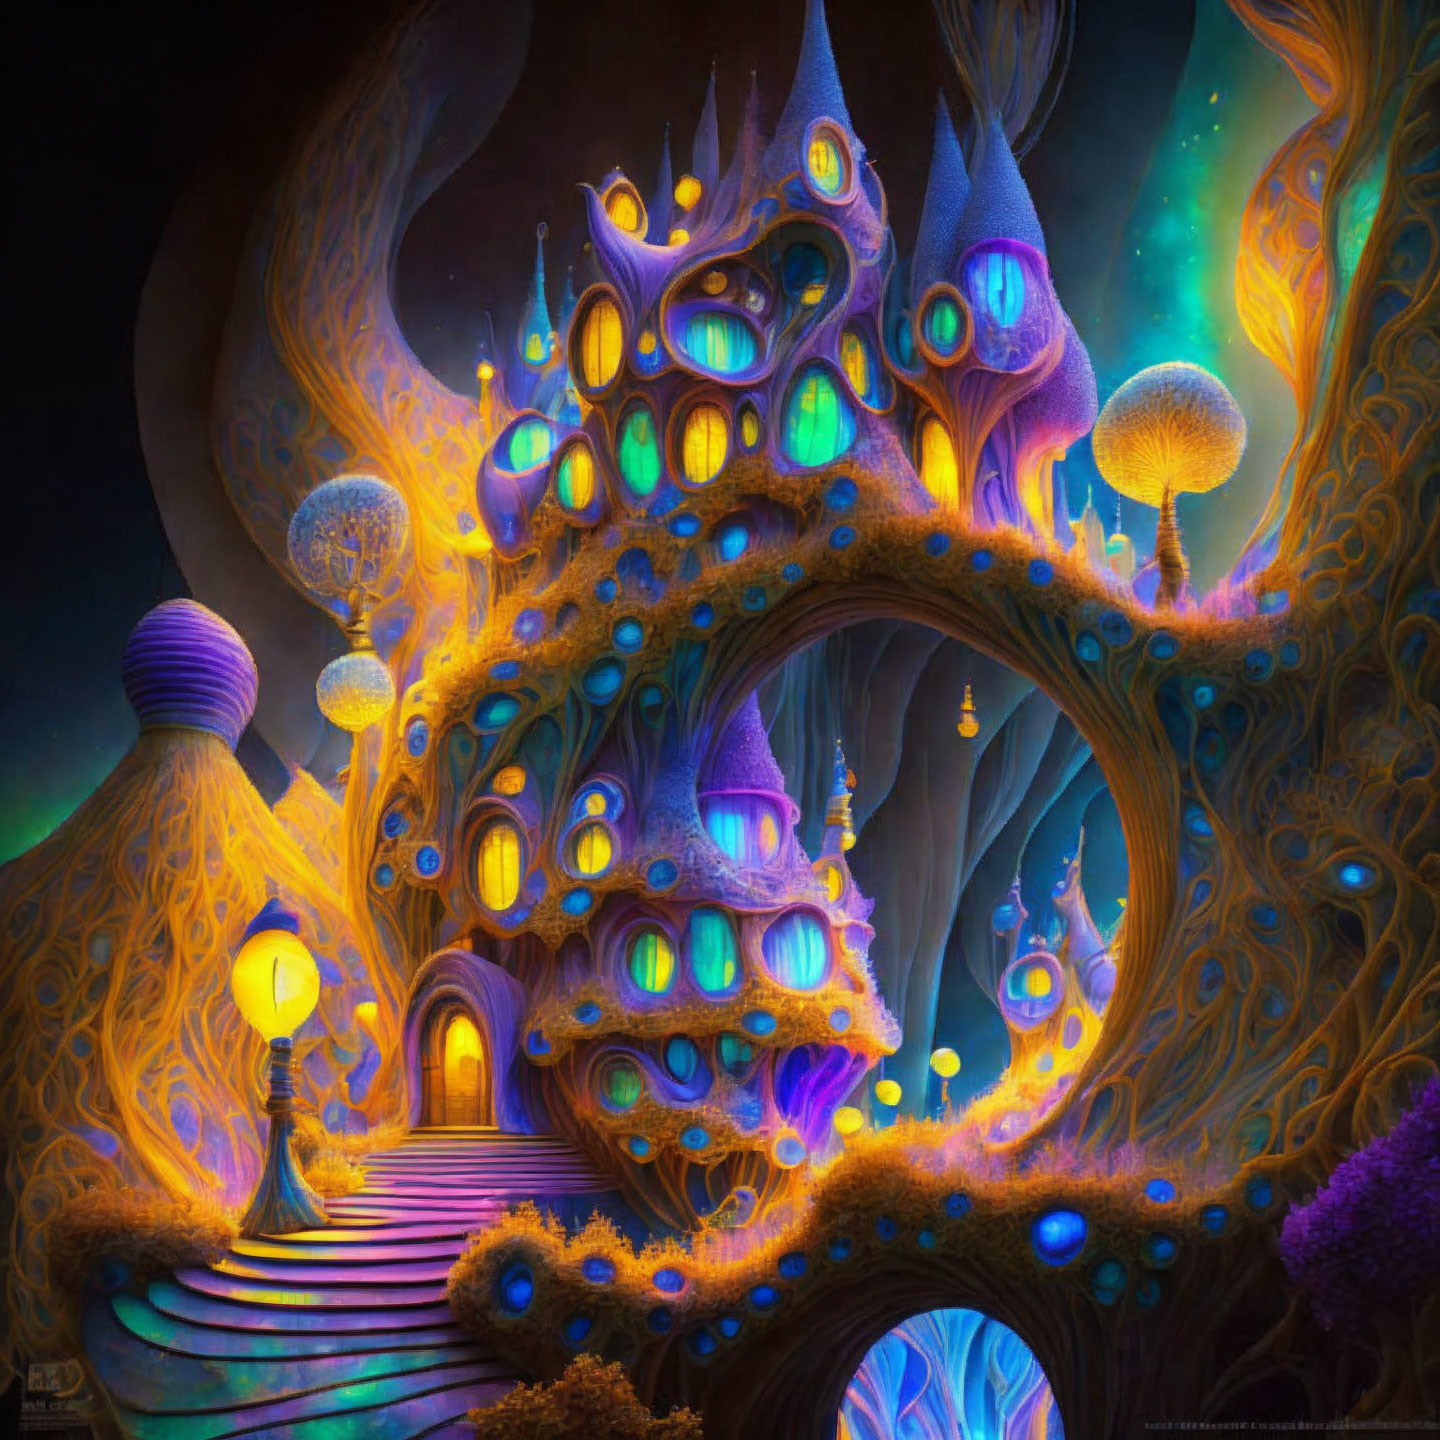 Fantasy Artwork: Glowing Structure in Magical Forest